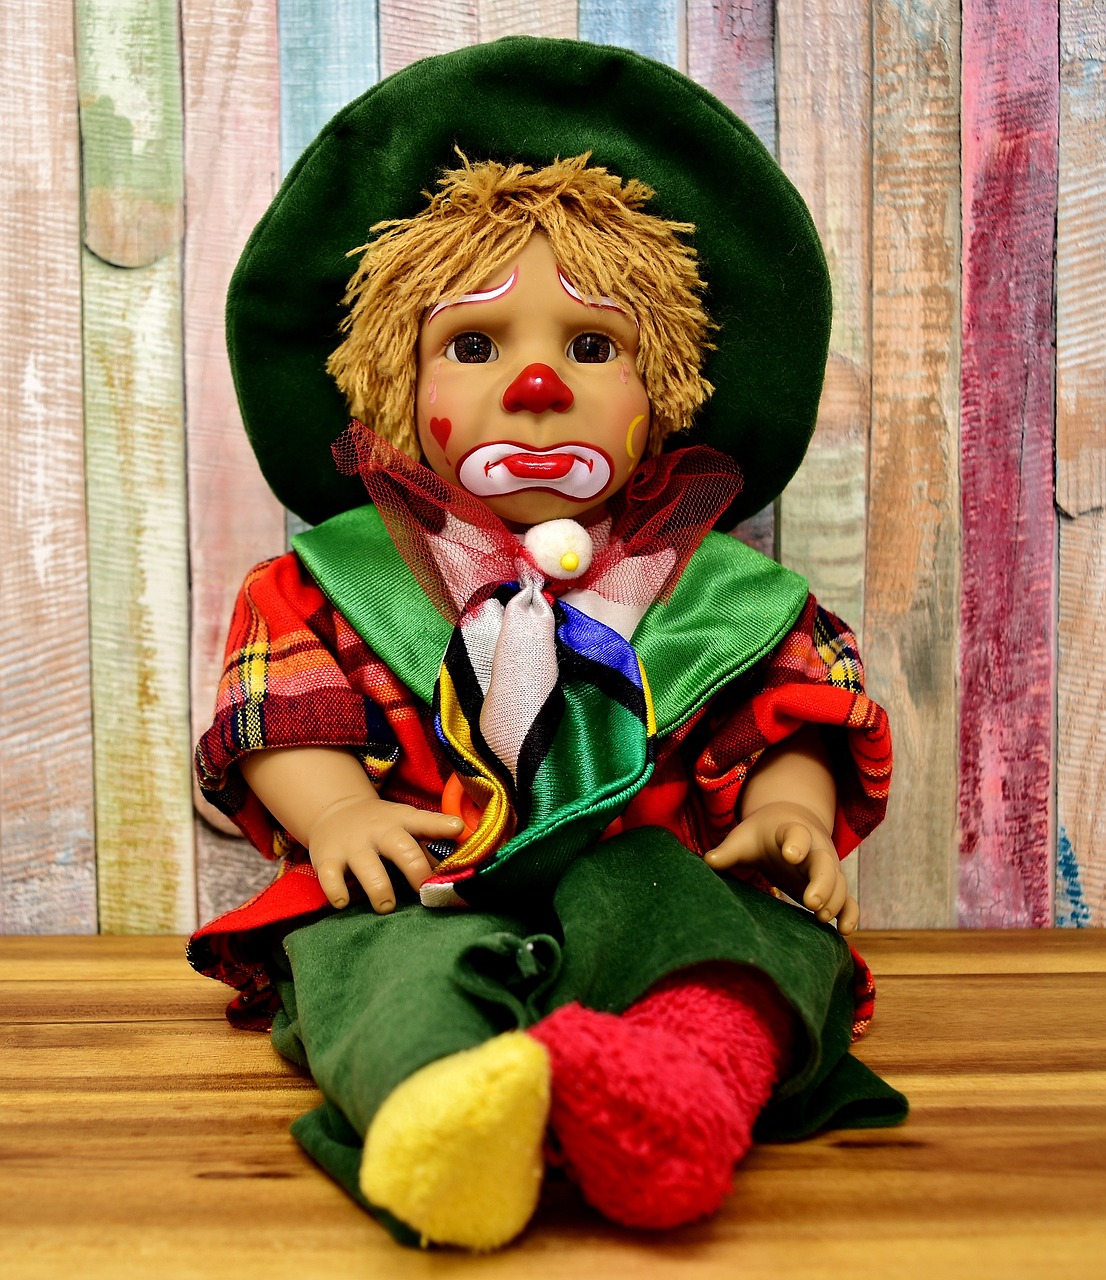 A sad clown doll with patchwork suit and woollen hair.